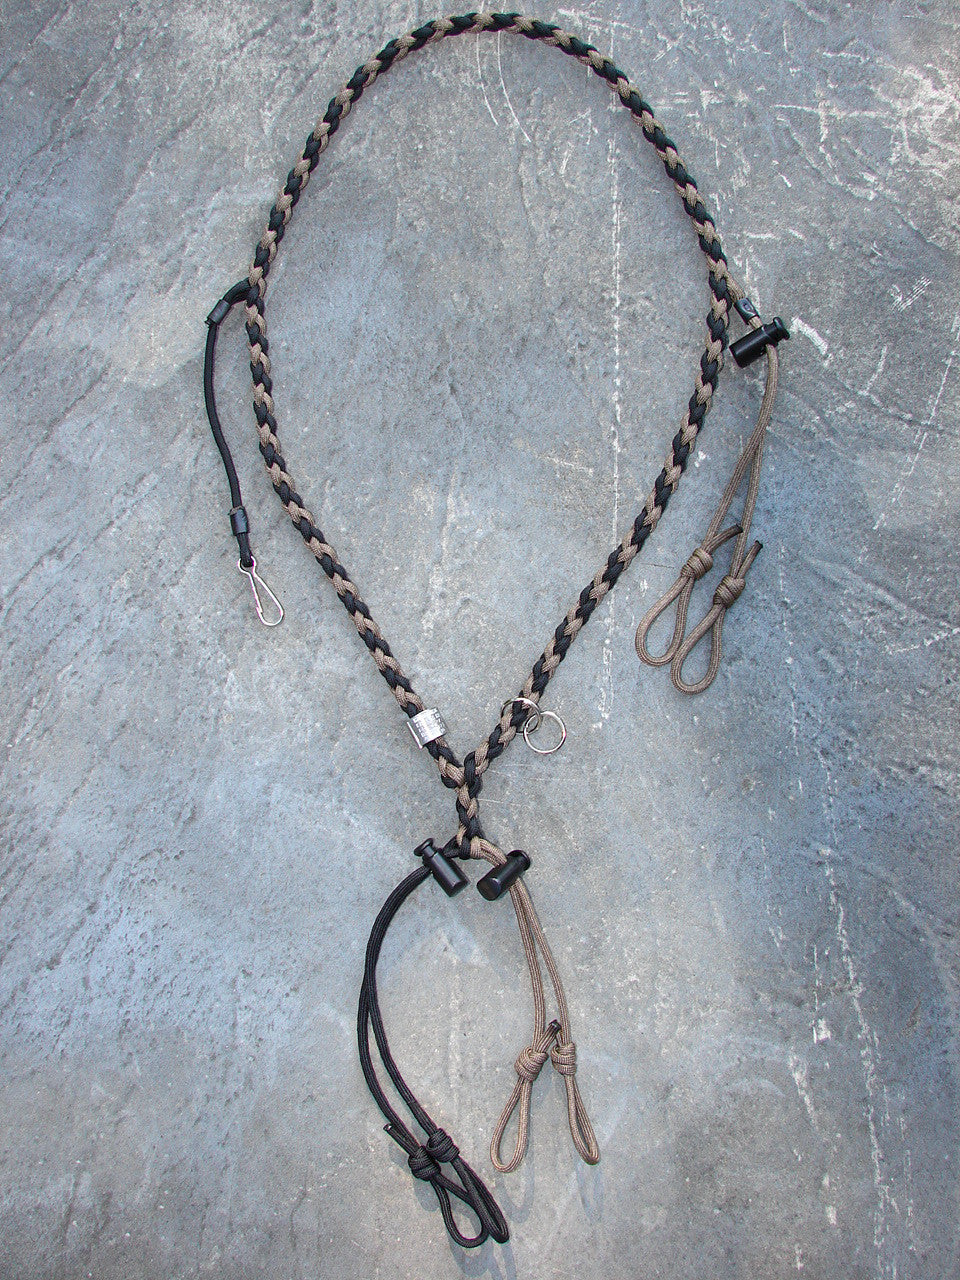 Paracord Lanyard for 3 calls and whistle - round braid